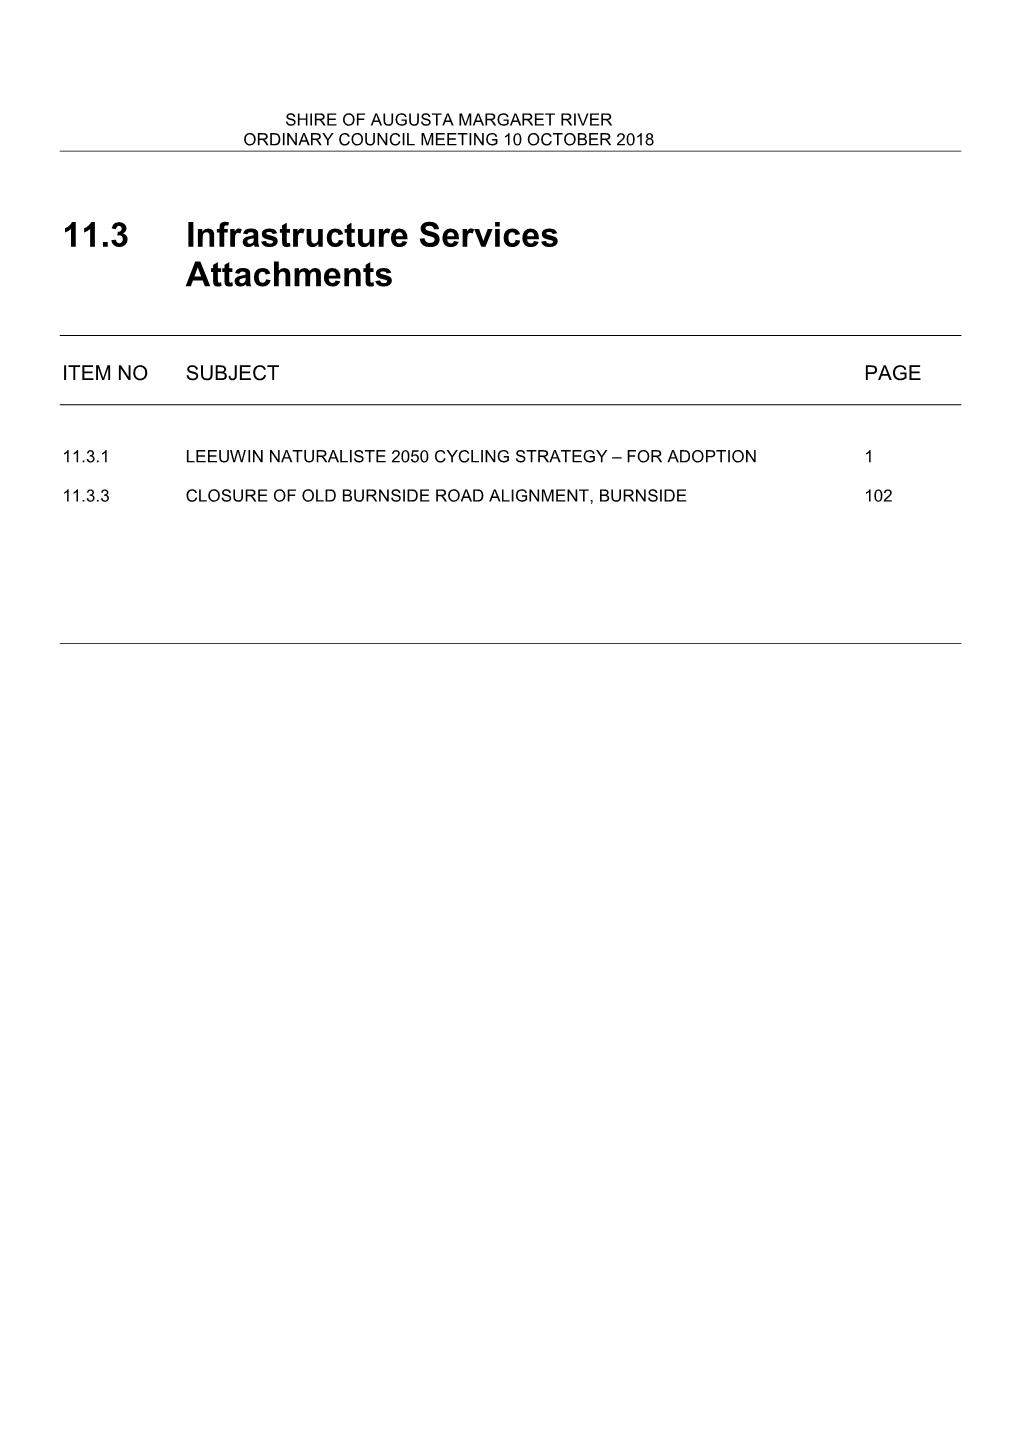 11.3 Infrastructure Services Attachments